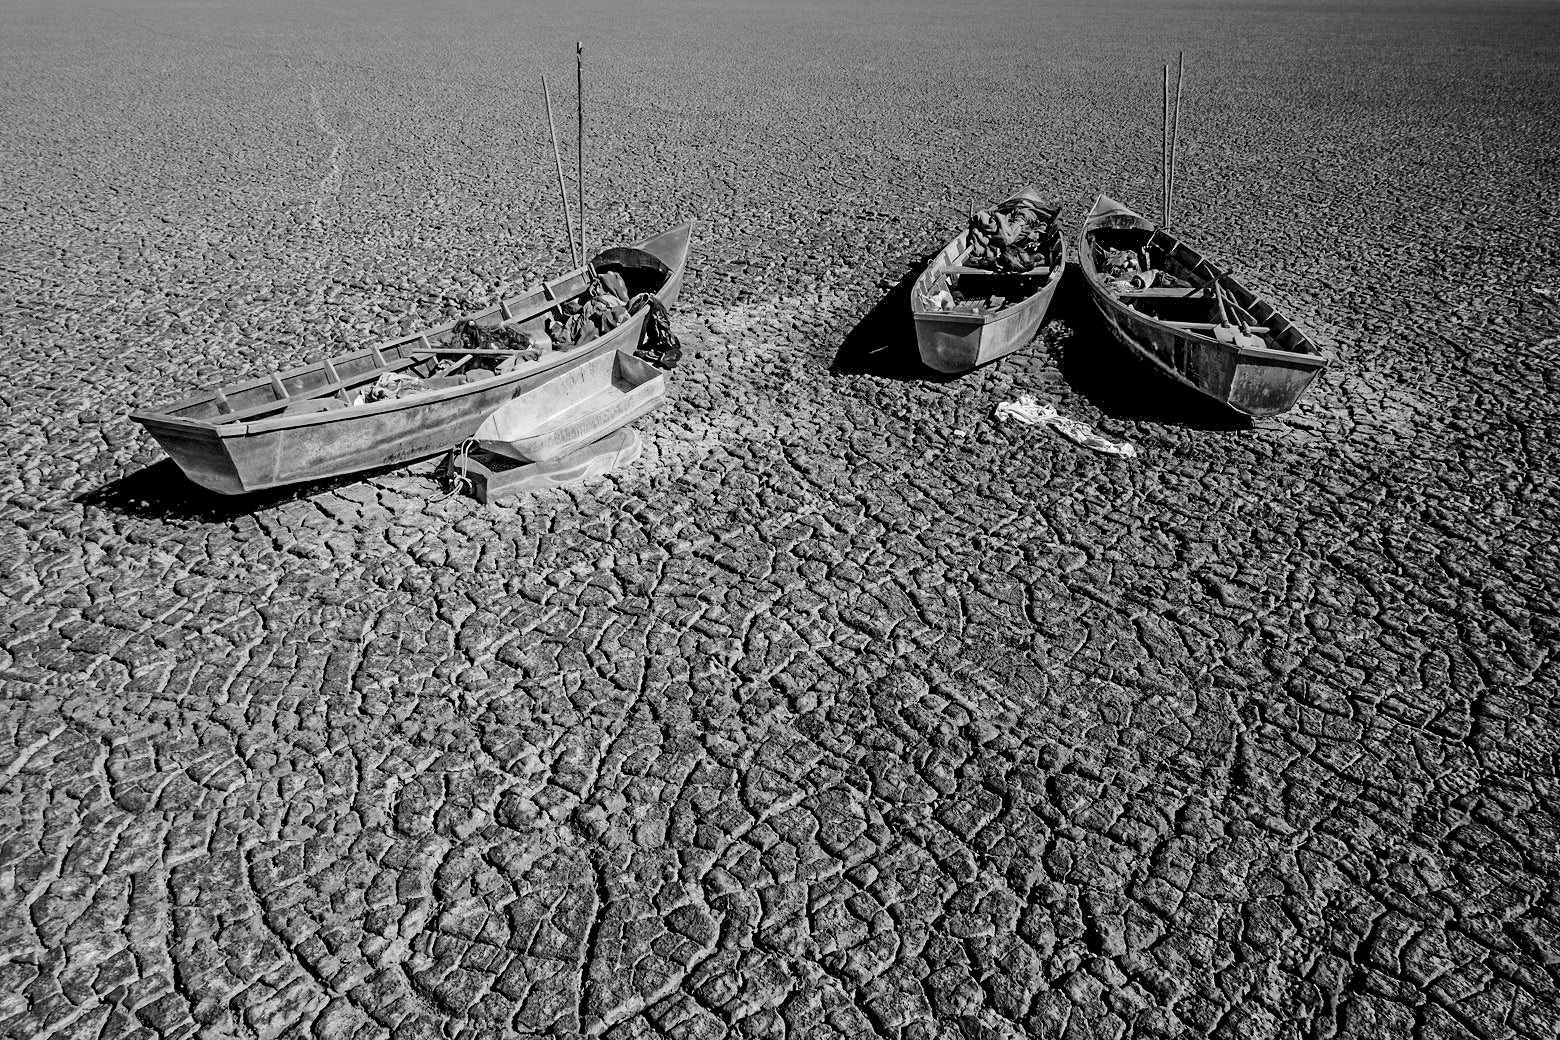 Boats of fishermen are seen on the dried Poopo lakebed in the Oruro Department, south of La Paz, Bolivia, December 17, 2015. Lake Poopo in Bolivia, the Andean nation's formerly second largest after the famed Titicaca, has dried up entirely. With the water now gone, animals have died off in the millions, according to studies. And the local families, having lost much of their sustenance, have been forced to migrate. REUTERS/David Mercado